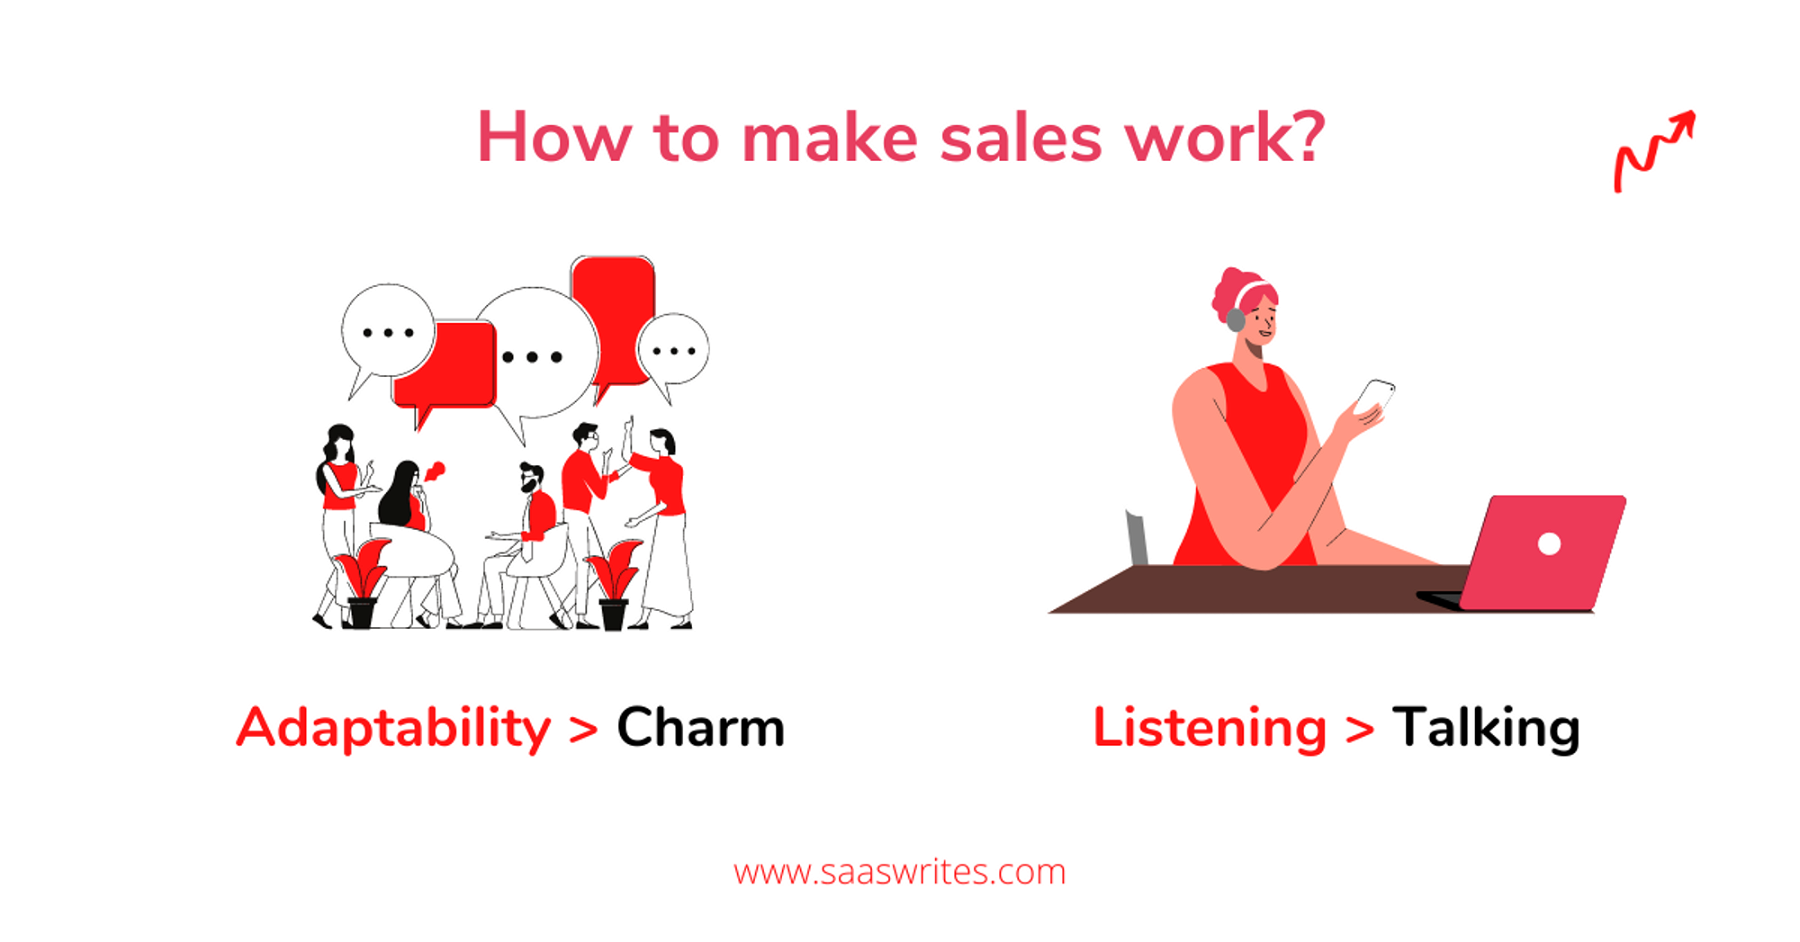 Sales are about being adaptable and listening to your prospects.